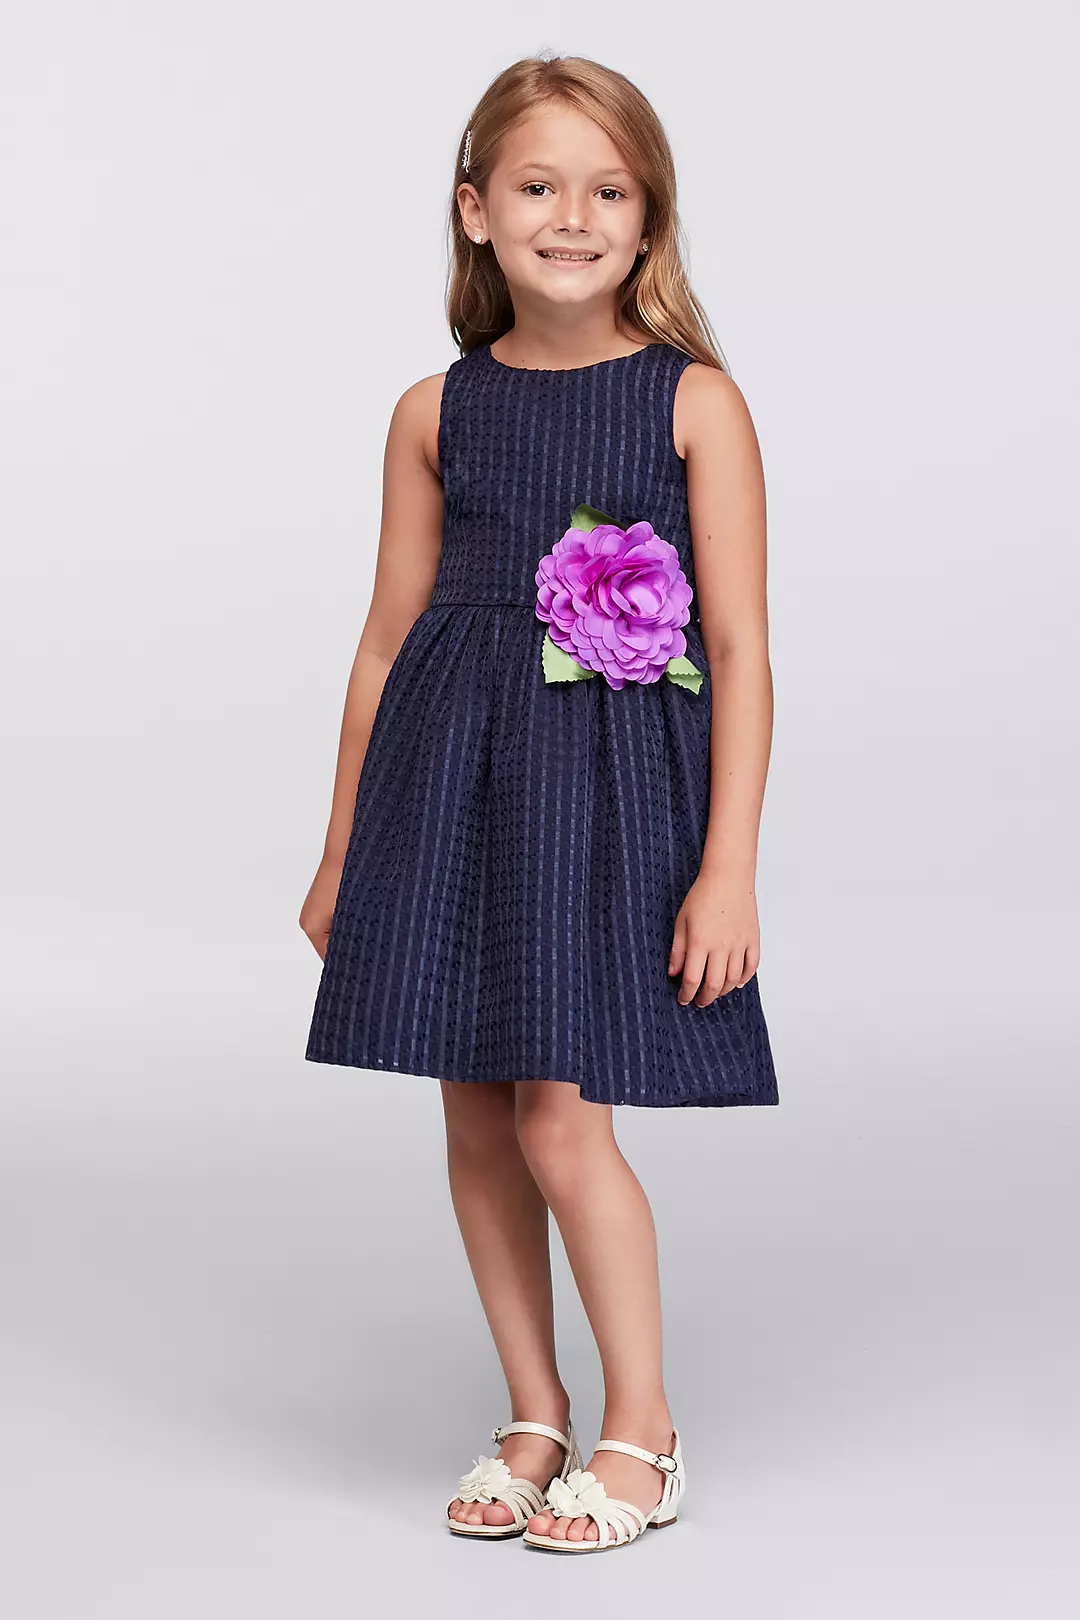 Basketweave Fit-and-Flare Dress with Flower Image